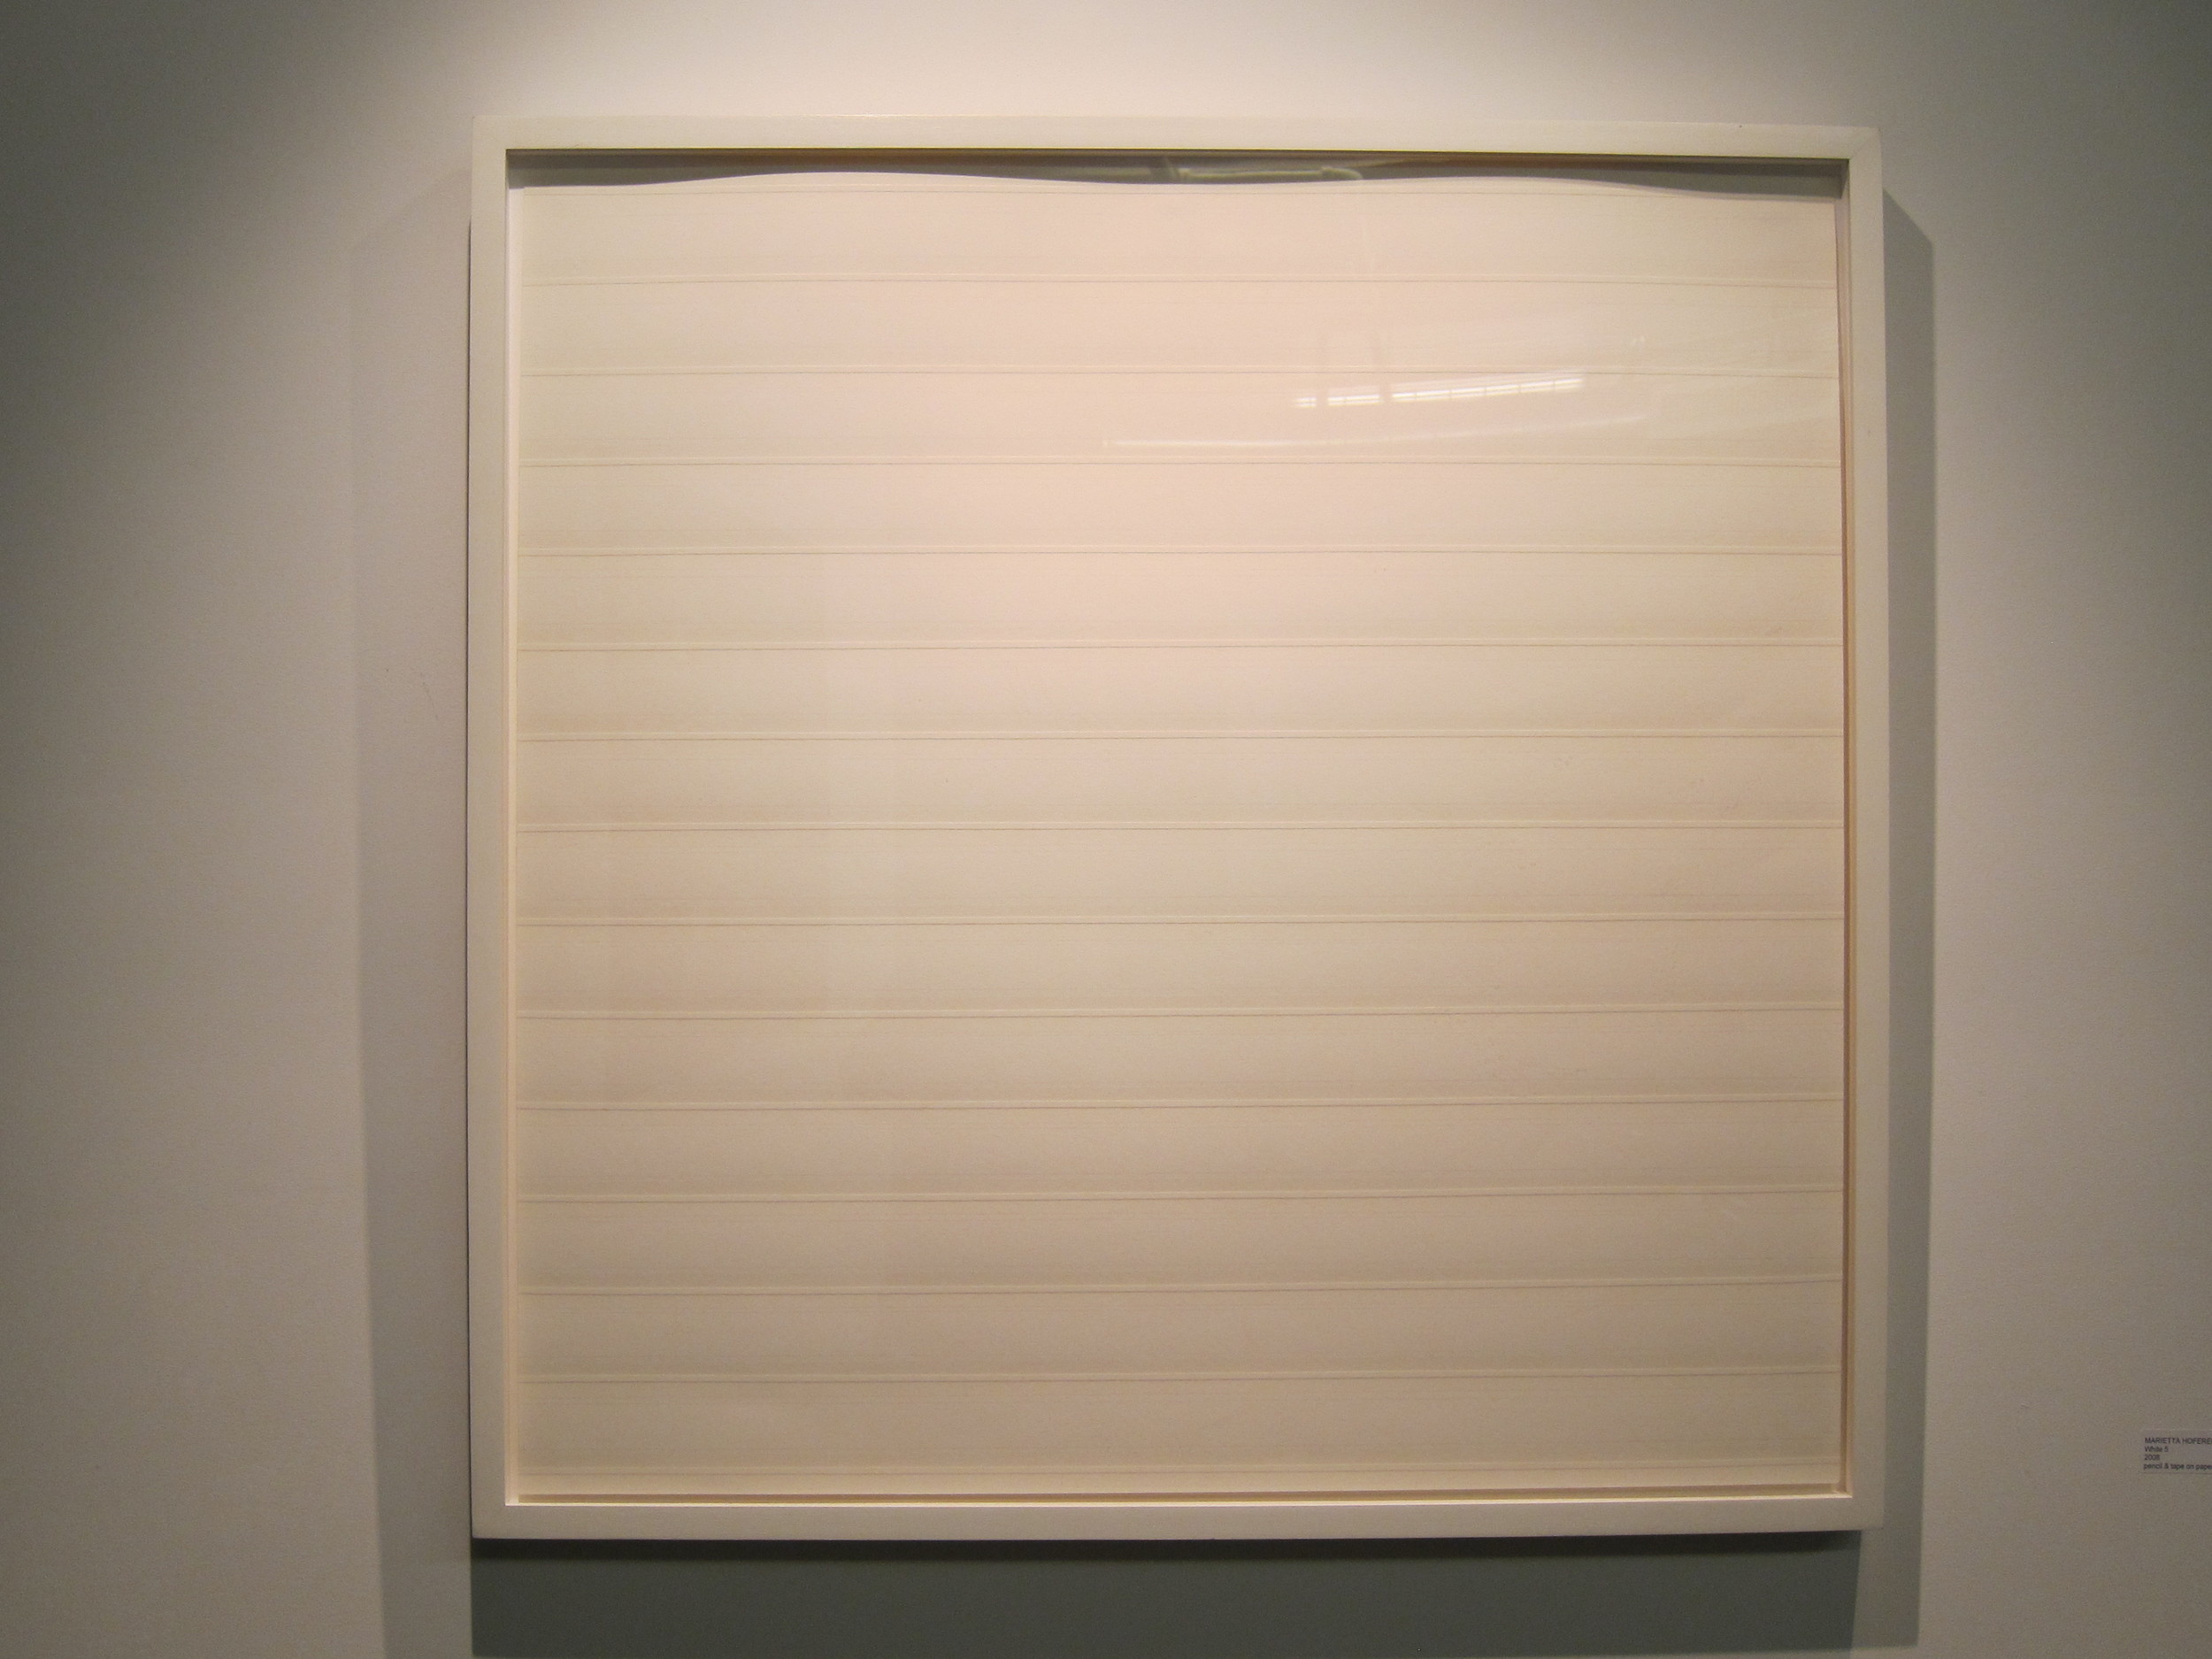  Marietta Hoferer White 5, 2008 Pencil and transparent tape on paper  31x31 inches  